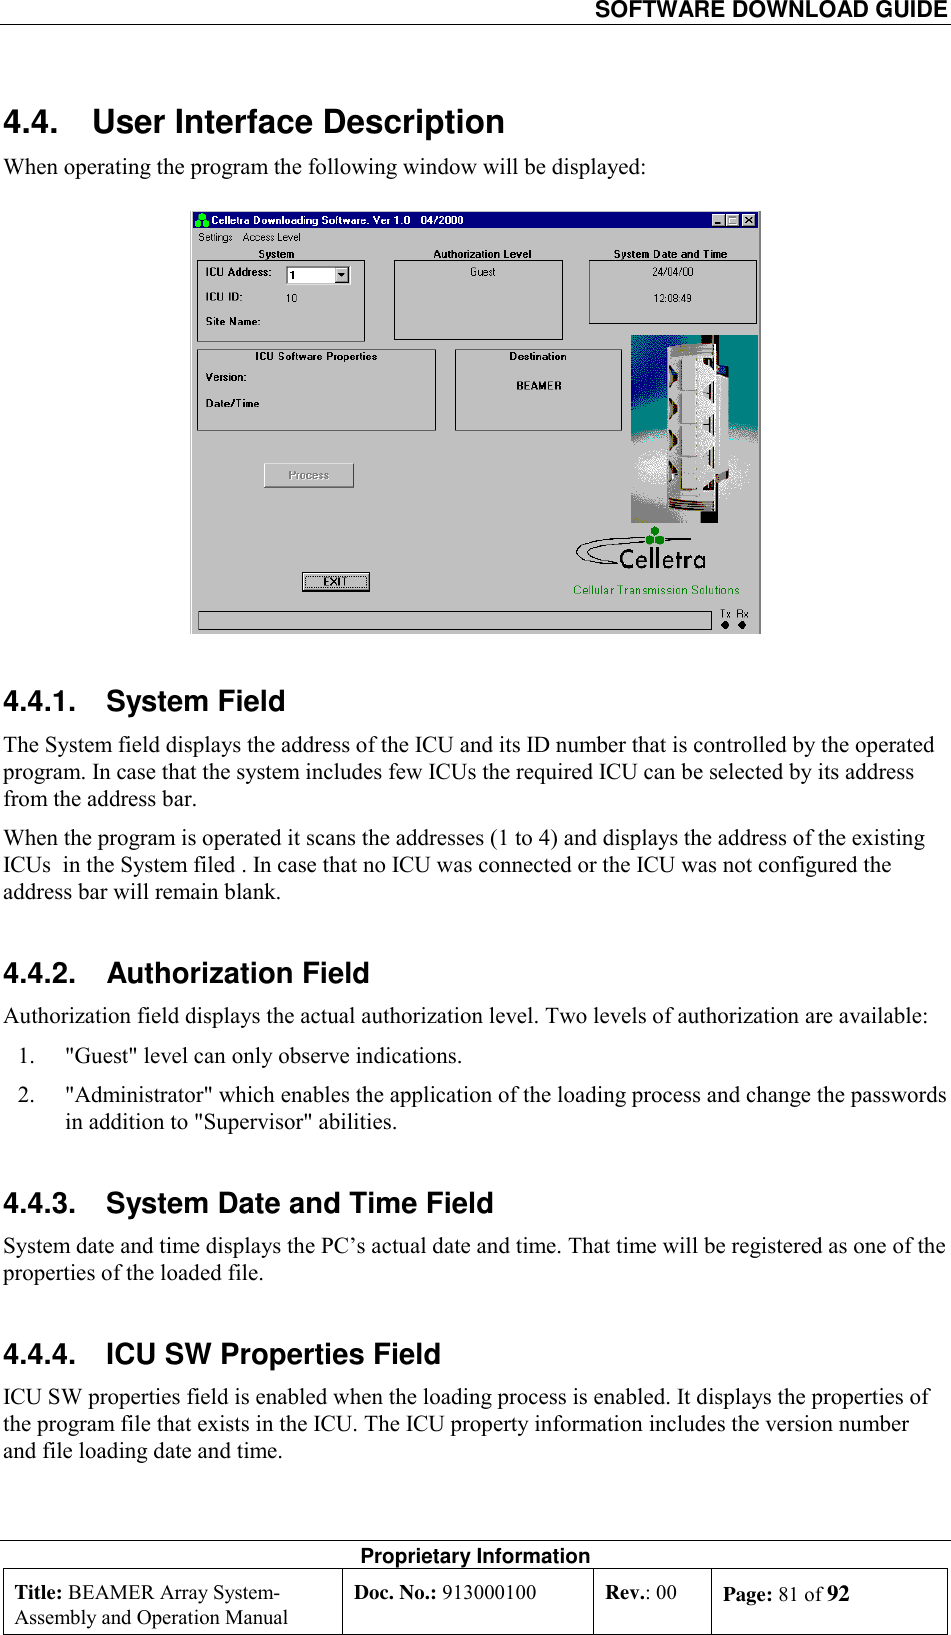   SOFTWARE DOWNLOAD GUIDE Proprietary Information Title: BEAMER Array System- Assembly and Operation Manual Doc. No.: 913000100  Rev.: 00  Page: 81 of 92  4.4.  User Interface Description When operating the program the following window will be displayed:  4.4.1. System Field The System field displays the address of the ICU and its ID number that is controlled by the operated program. In case that the system includes few ICUs the required ICU can be selected by its address from the address bar.   When the program is operated it scans the addresses (1 to 4) and displays the address of the existing ICUs  in the System filed . In case that no ICU was connected or the ICU was not configured the address bar will remain blank.  4.4.2. Authorization Field Authorization field displays the actual authorization level. Two levels of authorization are available: 1.  &quot;Guest&quot; level can only observe indications. 2.  &quot;Administrator&quot; which enables the application of the loading process and change the passwords in addition to &quot;Supervisor&quot; abilities.    4.4.3.  System Date and Time Field System date and time displays the PC’s actual date and time. That time will be registered as one of the properties of the loaded file. 4.4.4.  ICU SW Properties Field ICU SW properties field is enabled when the loading process is enabled. It displays the properties of the program file that exists in the ICU. The ICU property information includes the version number and file loading date and time. 